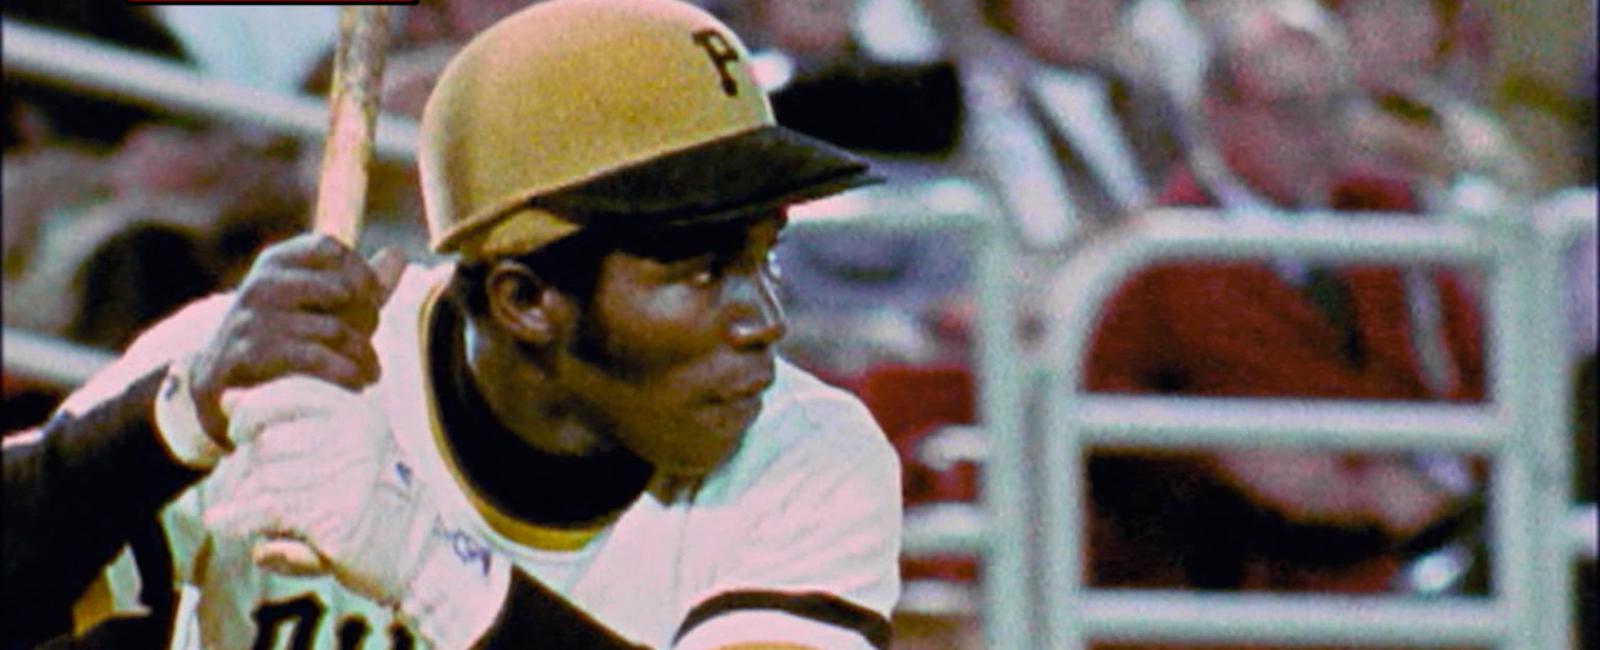 In august 1971 the pittsburgh pirates became the first professional team to field nine players who were either black or latino that was the same year they won the world series